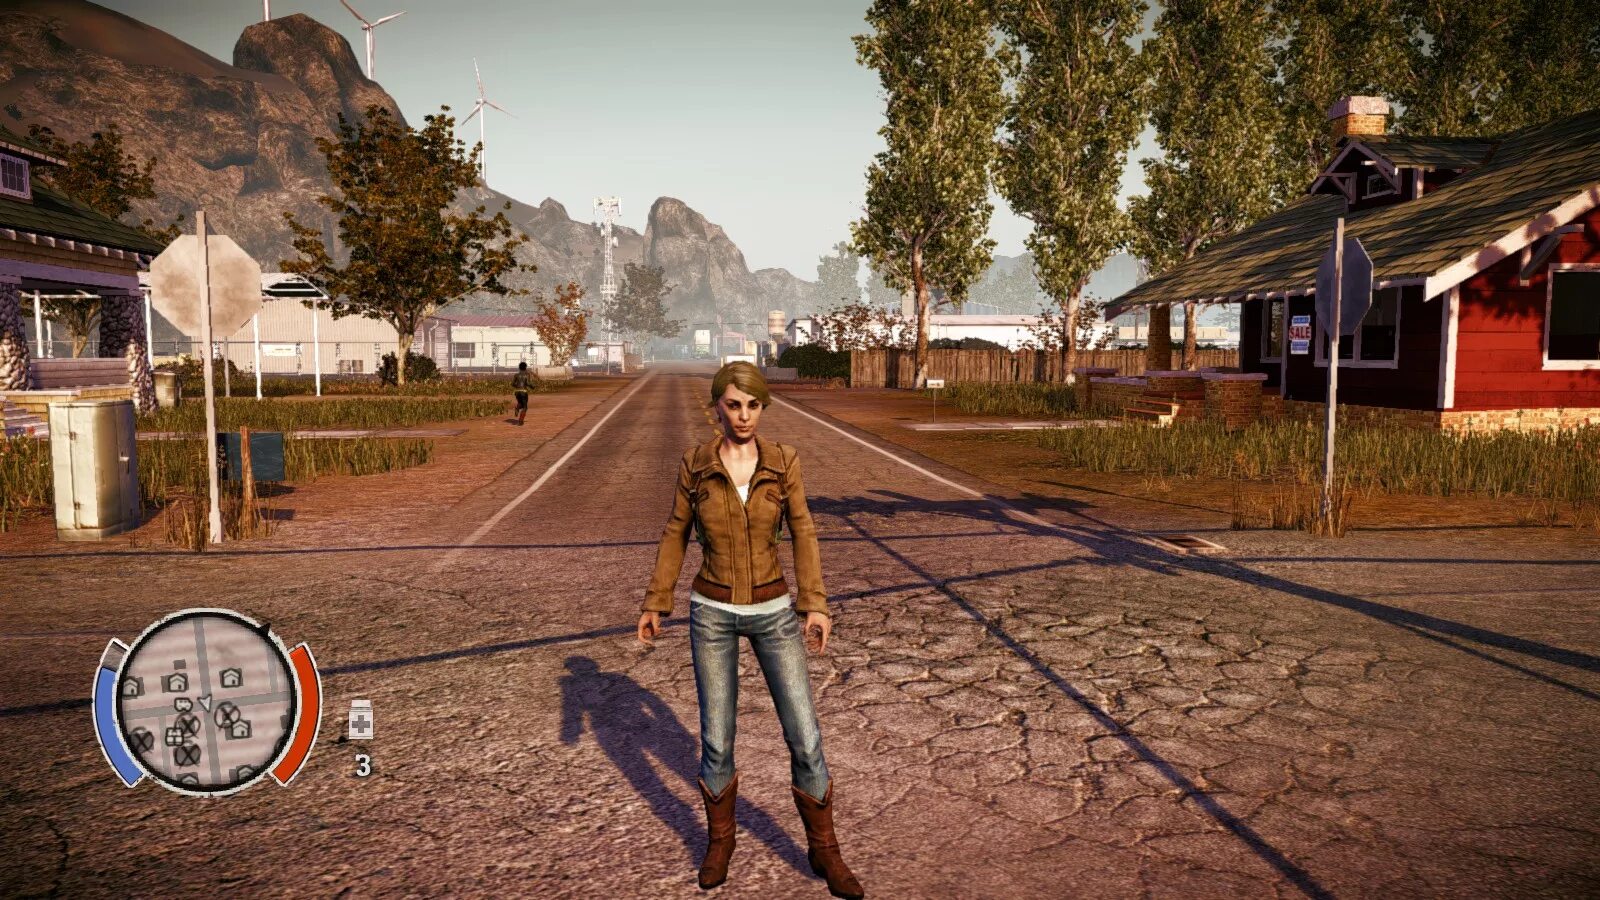 State of Decay 2 одежда. State of Decay 2 моды. State of Decay 2 вся одежда. Одежда в Стейт оф Дикей 2. State ii